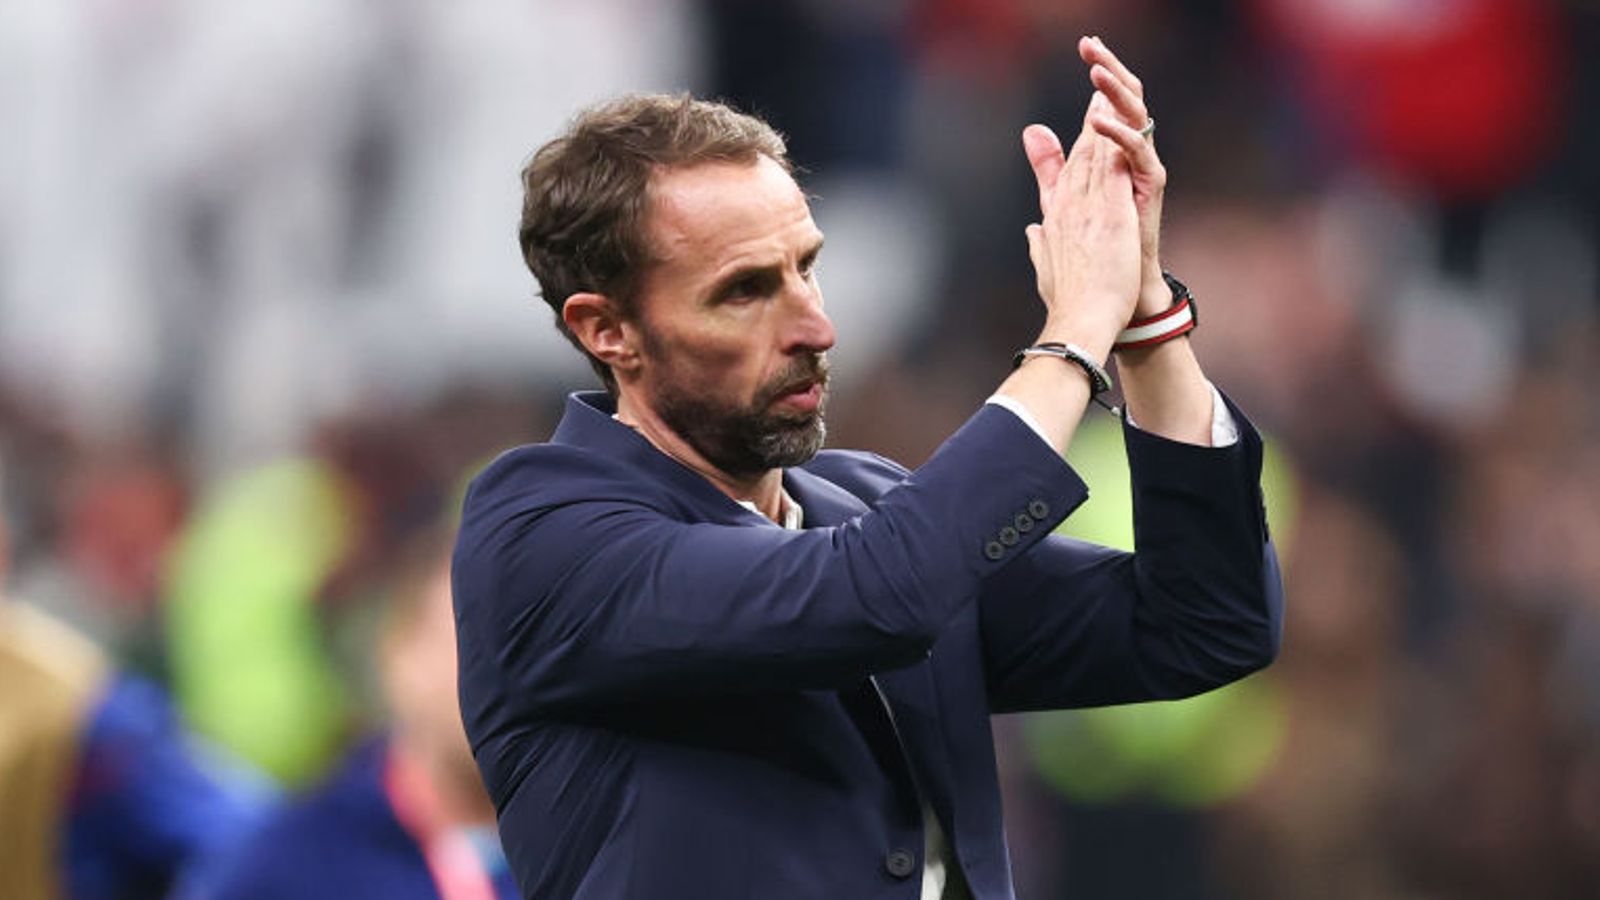 Gareth Southgate to wait on making decision on future as England manager after World Cup quarter-final exit | Football News